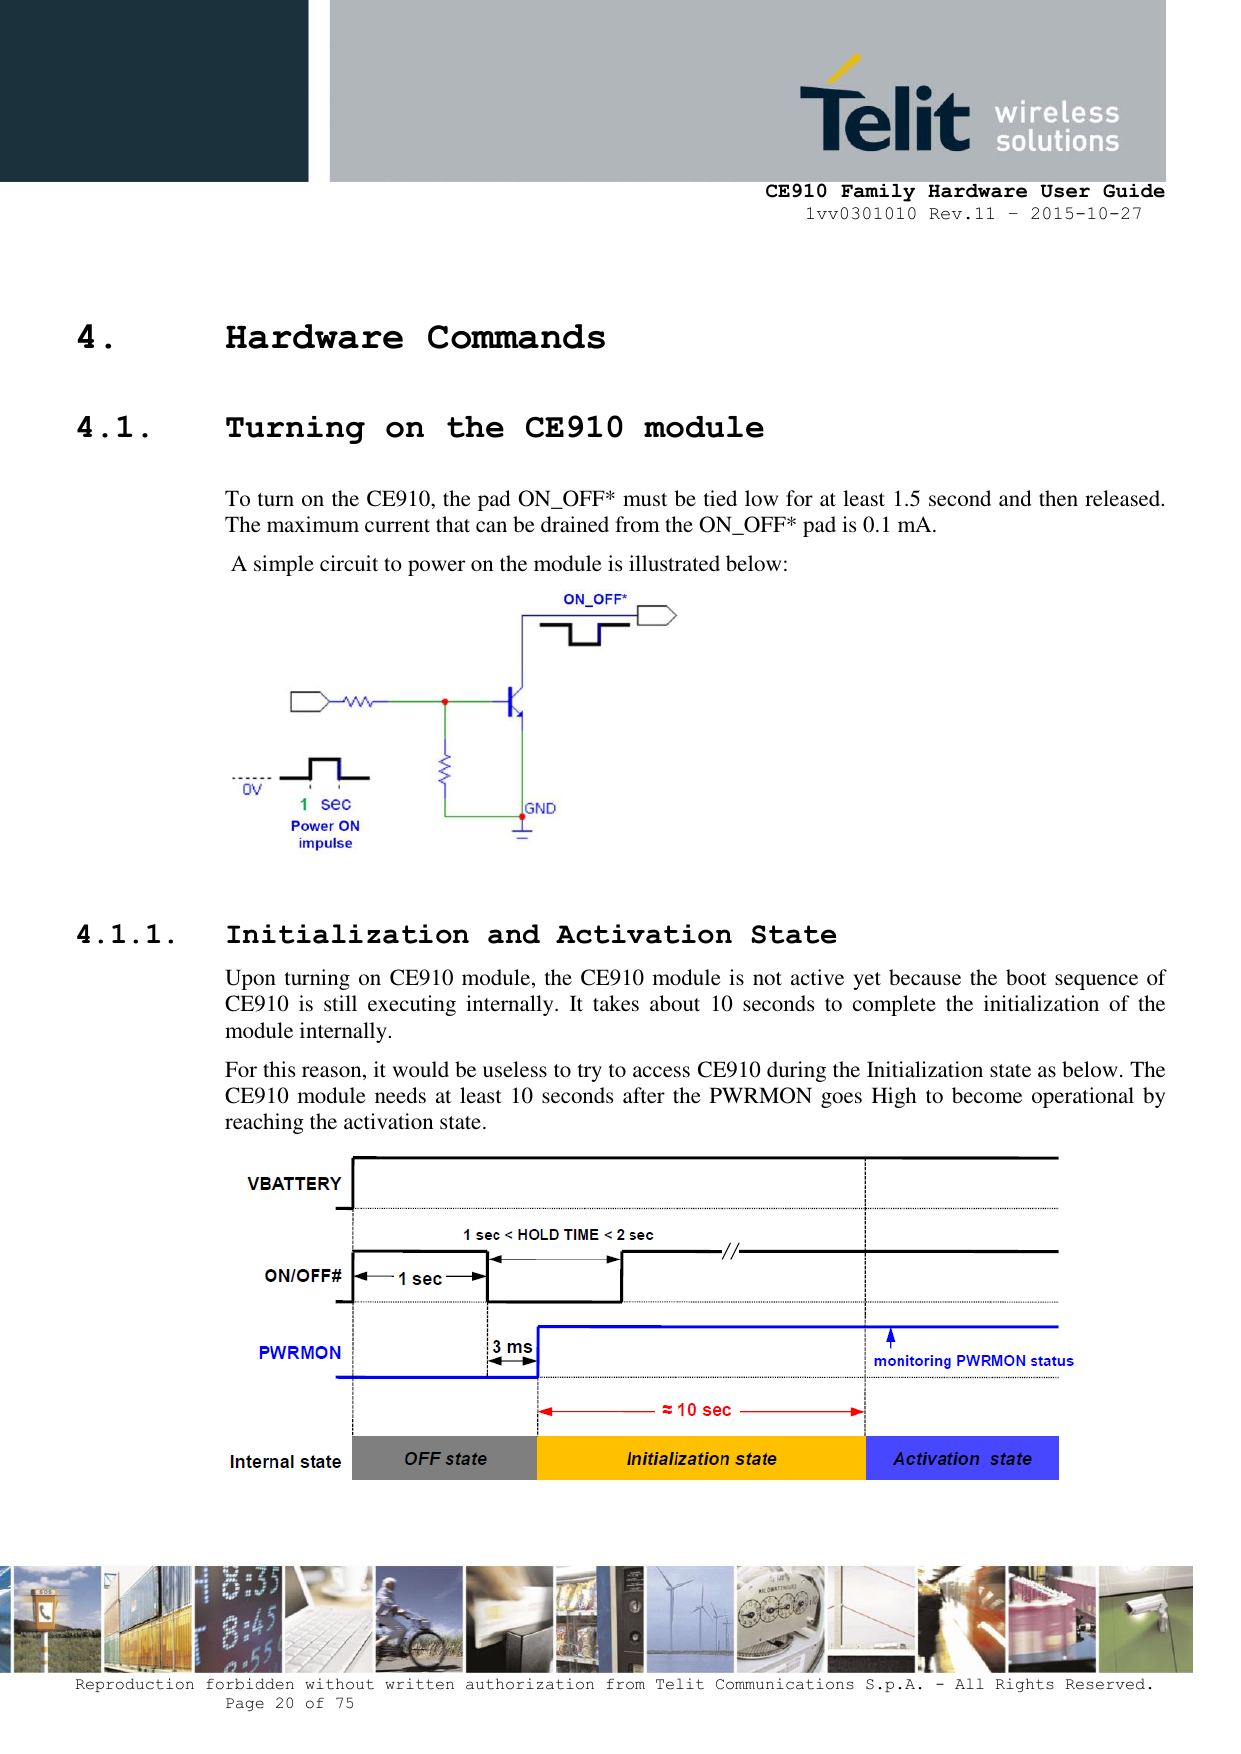     CE910 Family Hardware User Guide 1vv0301010 Rev.11 – 2015-10-27 Reproduction forbidden without written authorization from Telit Communications S.p.A. - All Rights Reserved.    Page 20 of 75                                                     4. Hardware Commands 4.1. Turning on the CE910 module To turn on the CE910, the pad ON_OFF* must be tied low for at least 1.5 second and then released. The maximum current that can be drained from the ON_OFF* pad is 0.1 mA.  A simple circuit to power on the module is illustrated below:    4.1.1. Initialization and Activation State Upon turning on CE910 module, the CE910 module is not active yet because the boot sequence of CE910  is  still  executing  internally.  It  takes  about  10  seconds  to  complete  the  initialization  of  the module internally. For this reason, it would be useless to try to access CE910 during the Initialization state as below. The CE910 module needs at least 10 seconds after the PWRMON goes High to become operational by reaching the activation state.   